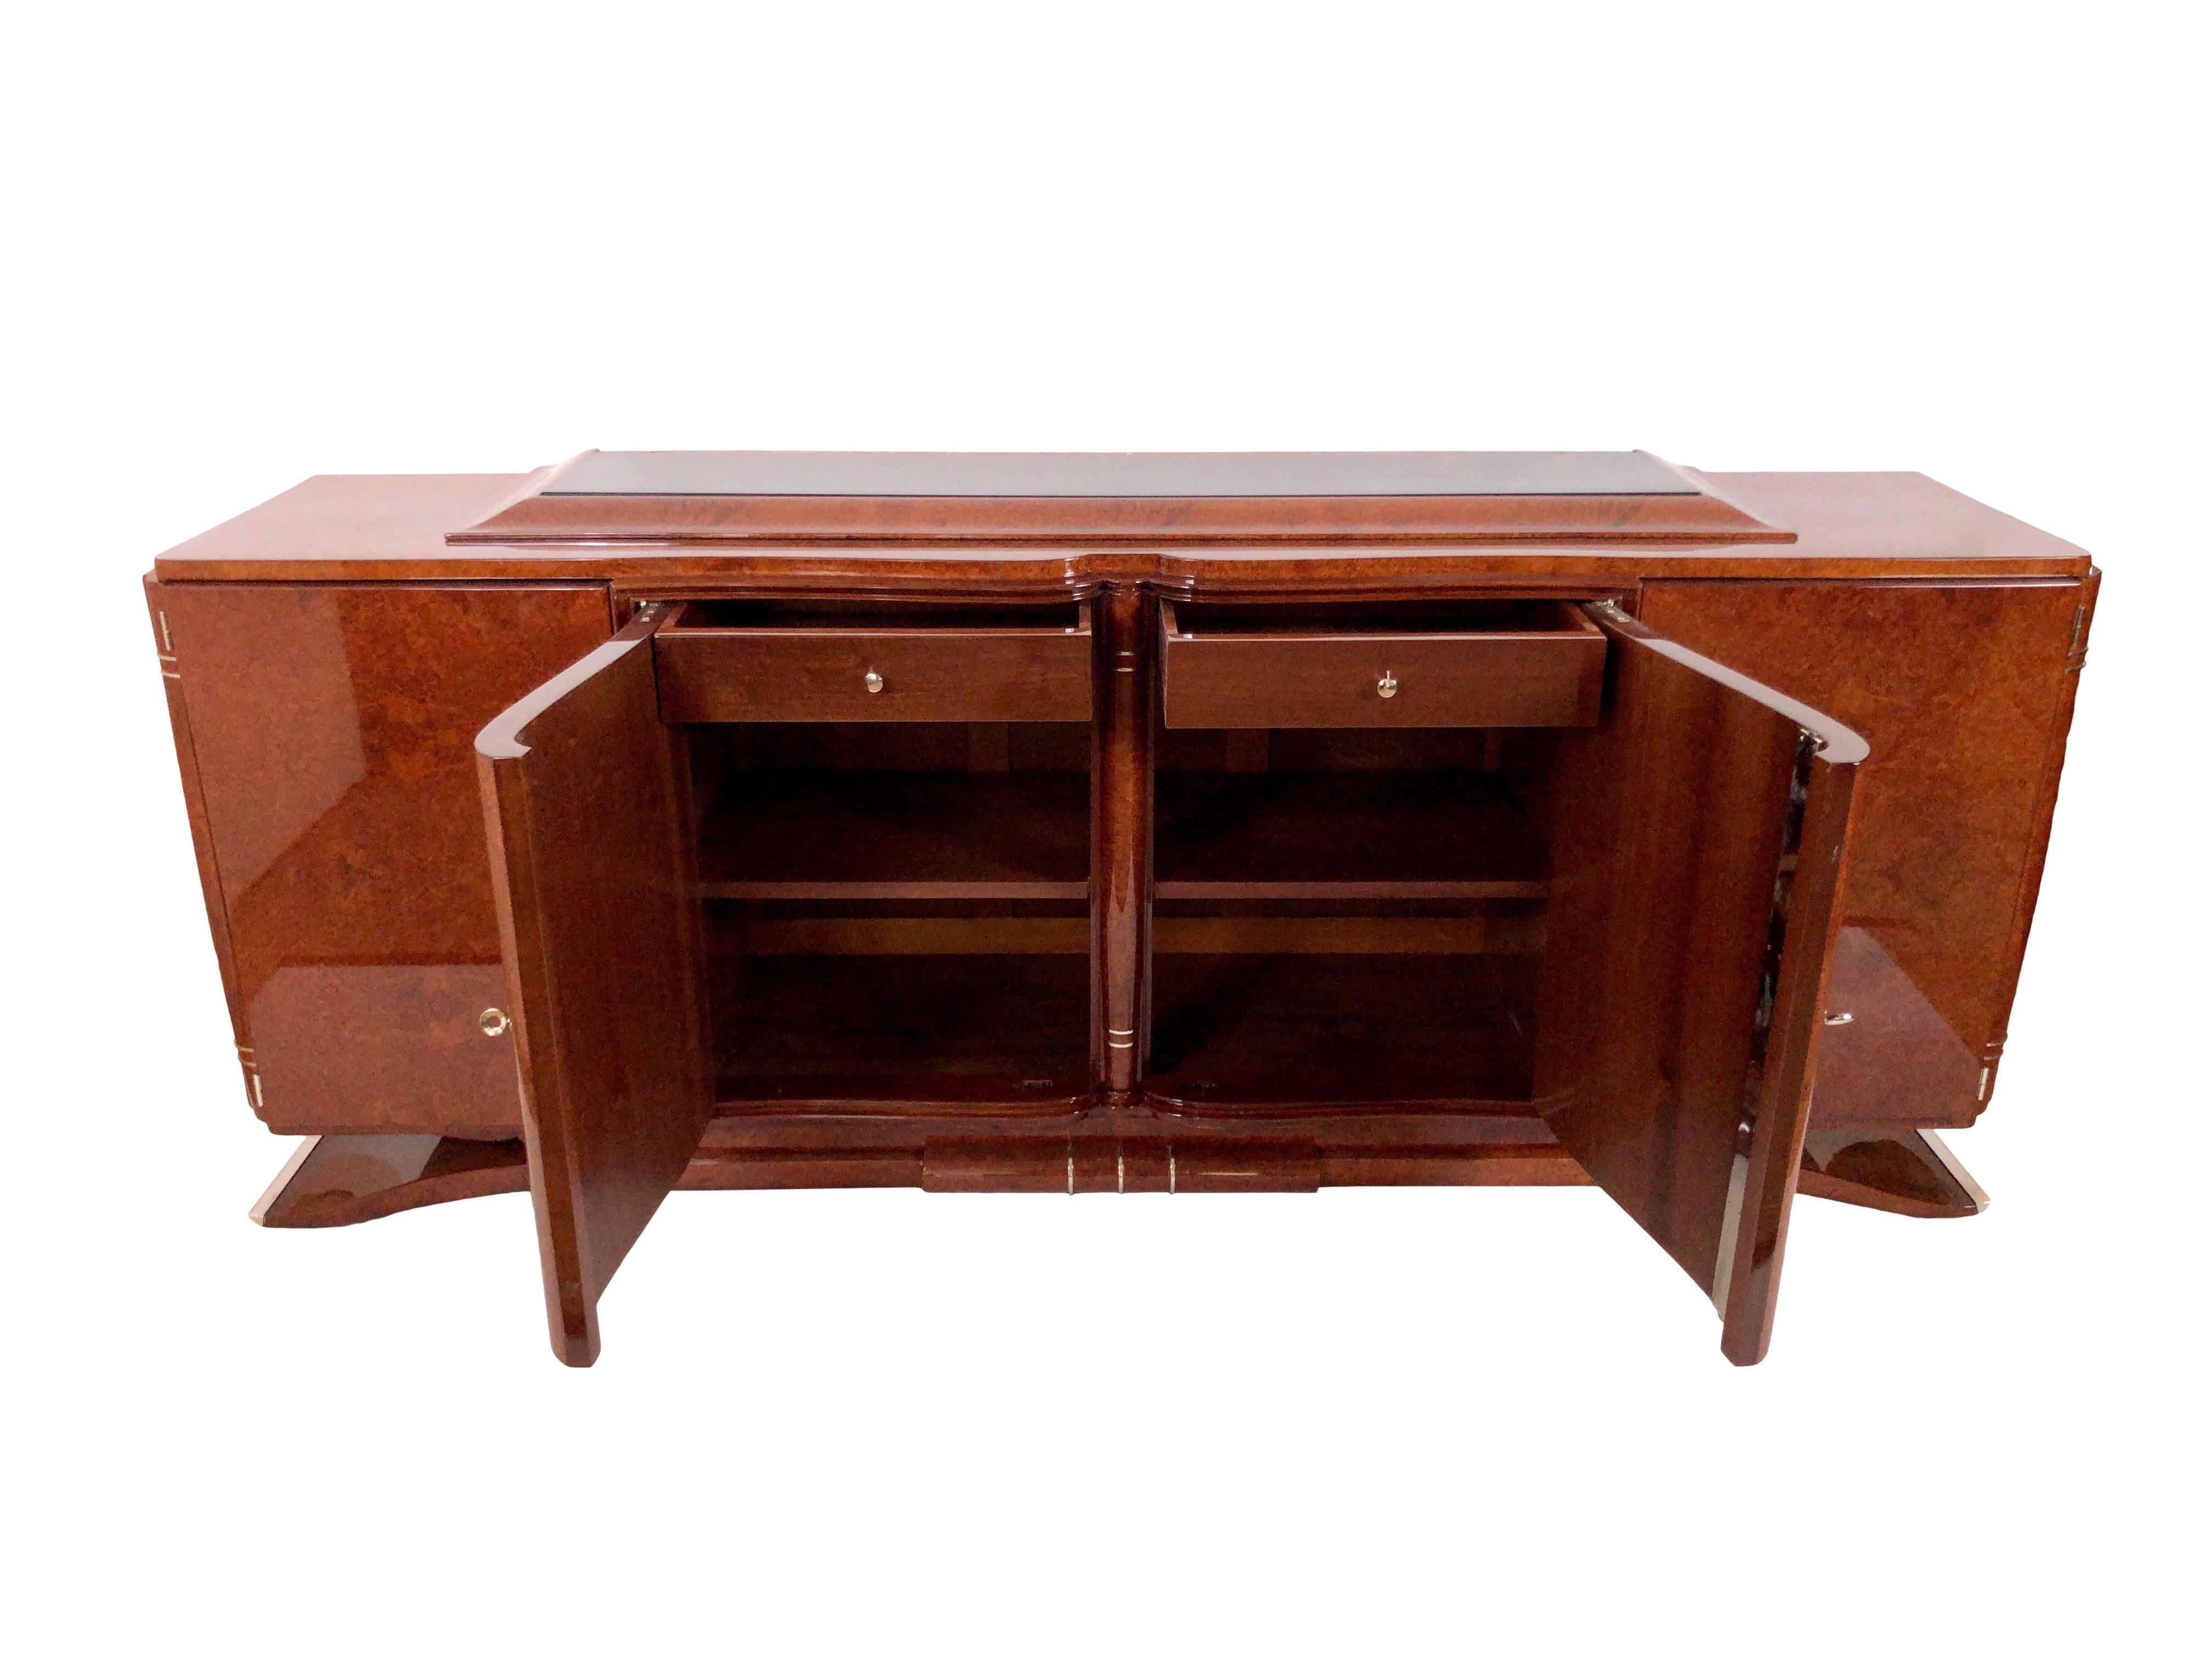 Lacquered 1930s French Art Deco Sideboard in Real Wood Veneer on a Moustache Foot For Sale